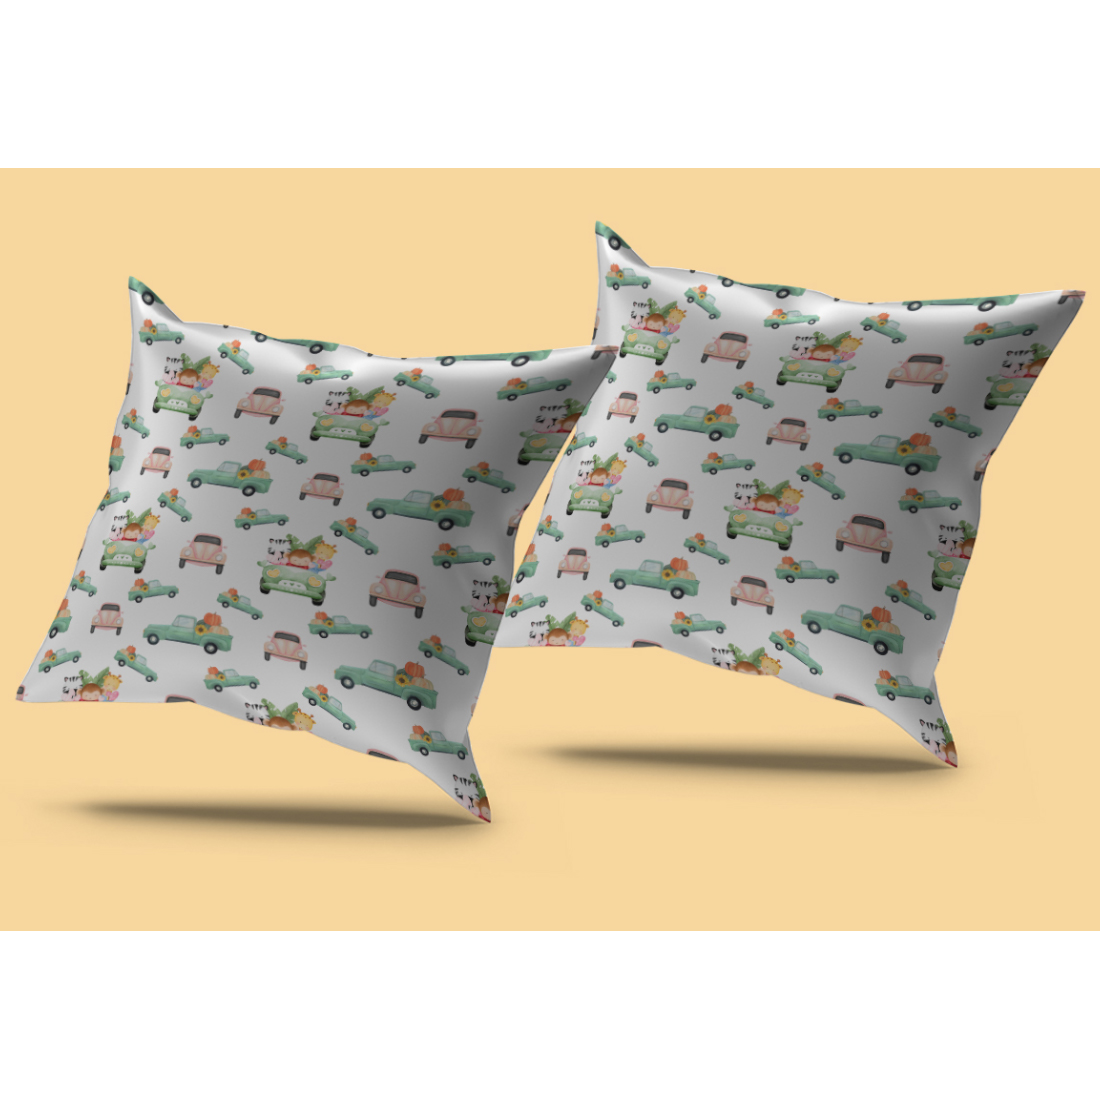 Image of pillows with adorable car patterns